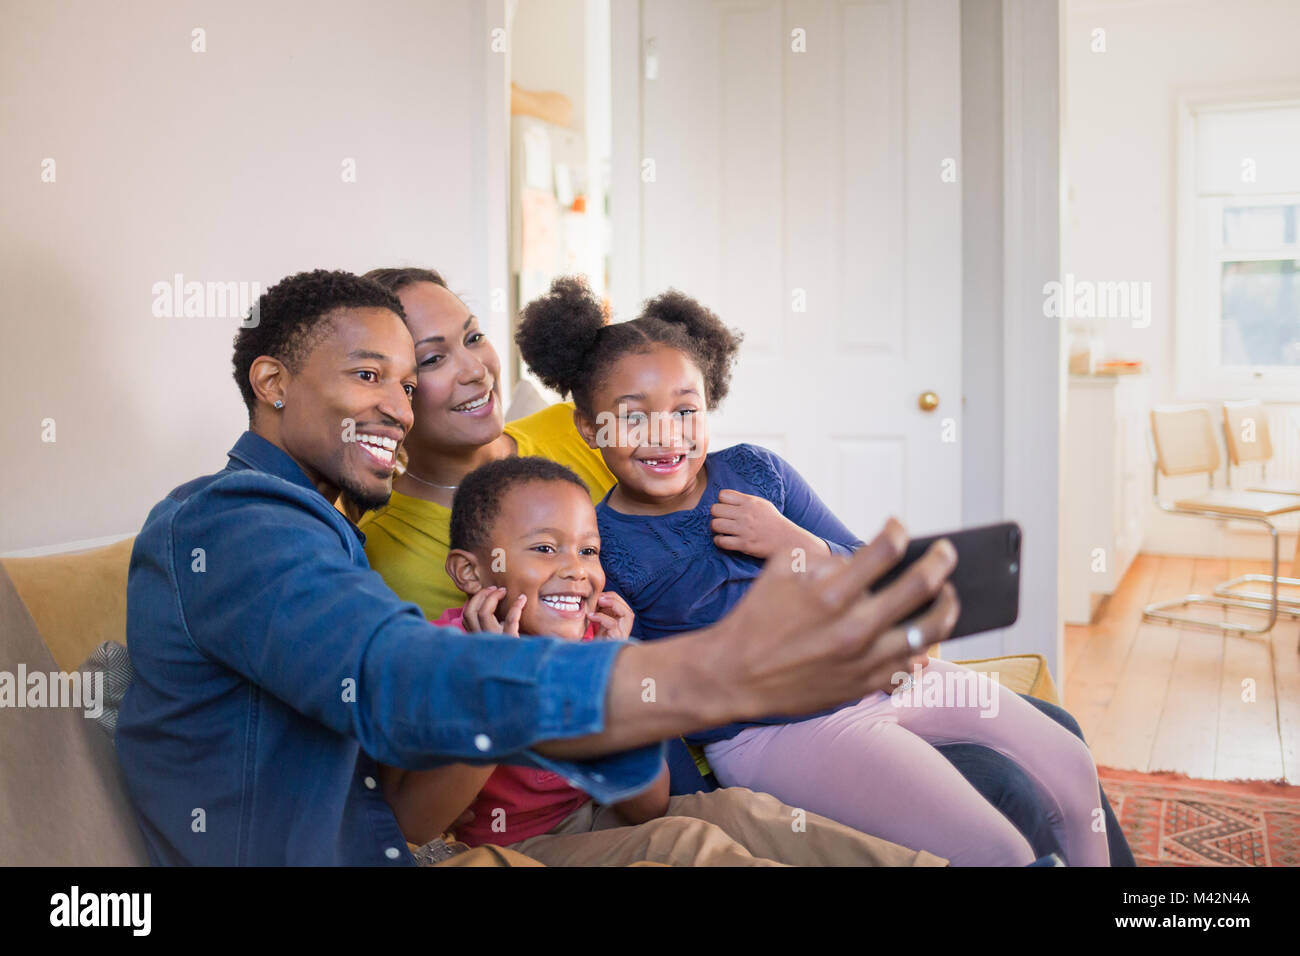 Family taking a selfie with a smartphone Stock Photo